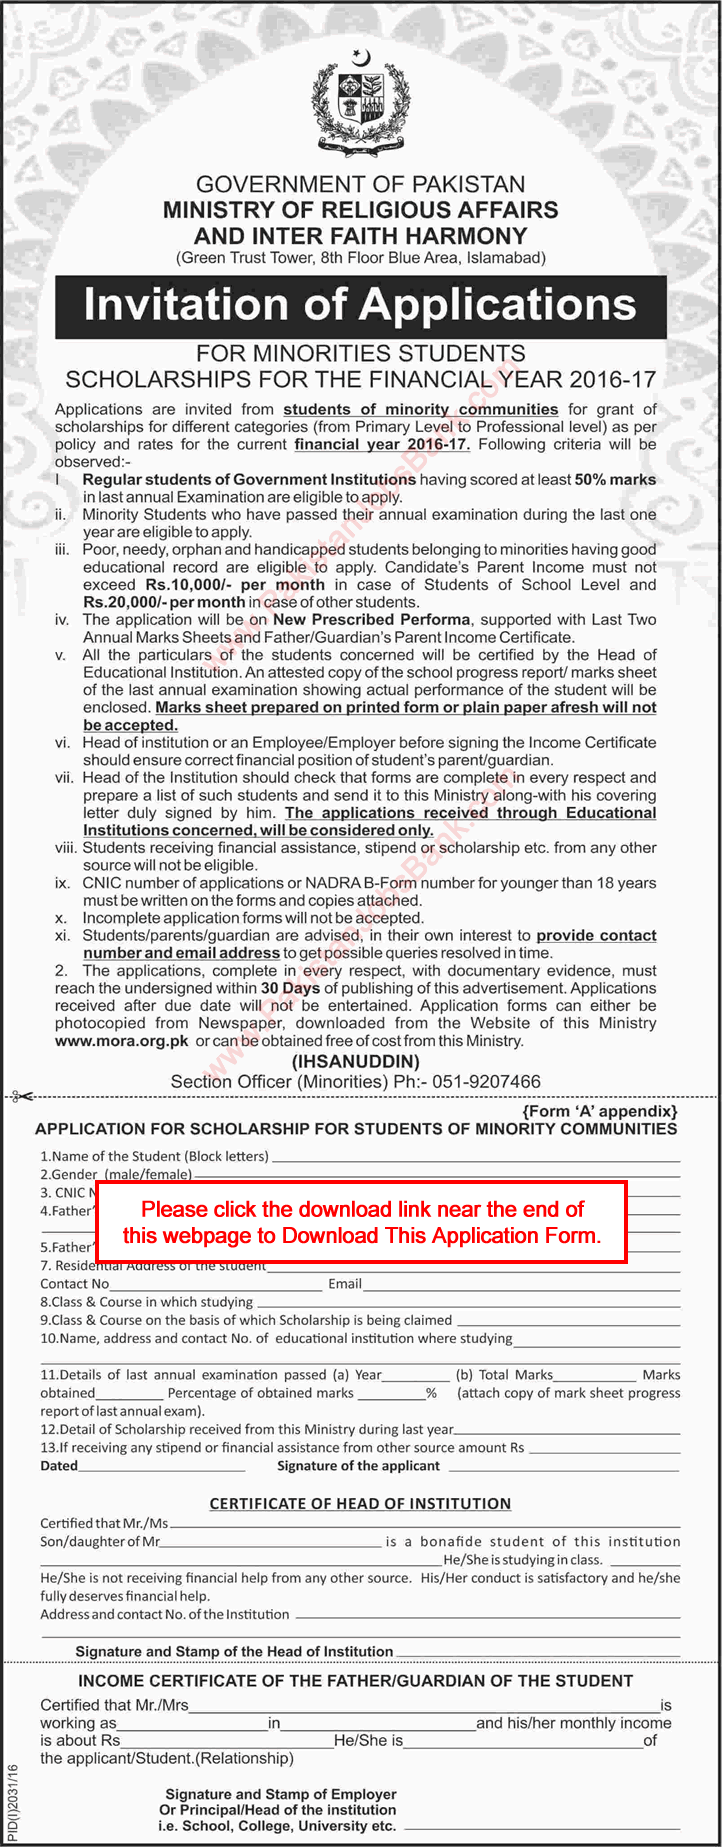 Ministry of Religious Affairs Scholarships for Minorities Students 2016 October / November Application Form Latest